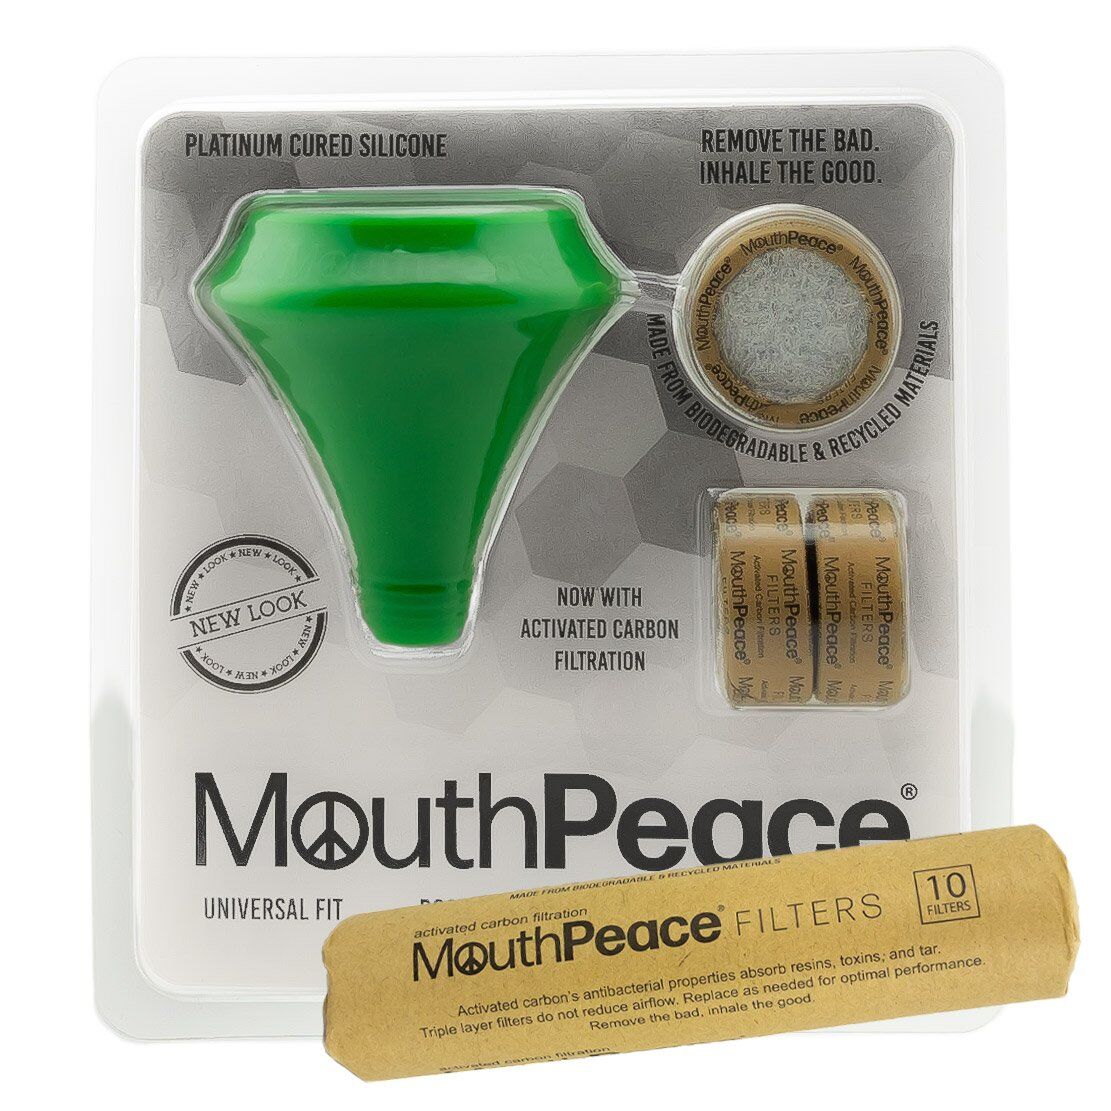 Medible review green mouthpeace silicone bundle mouthpiece germ free